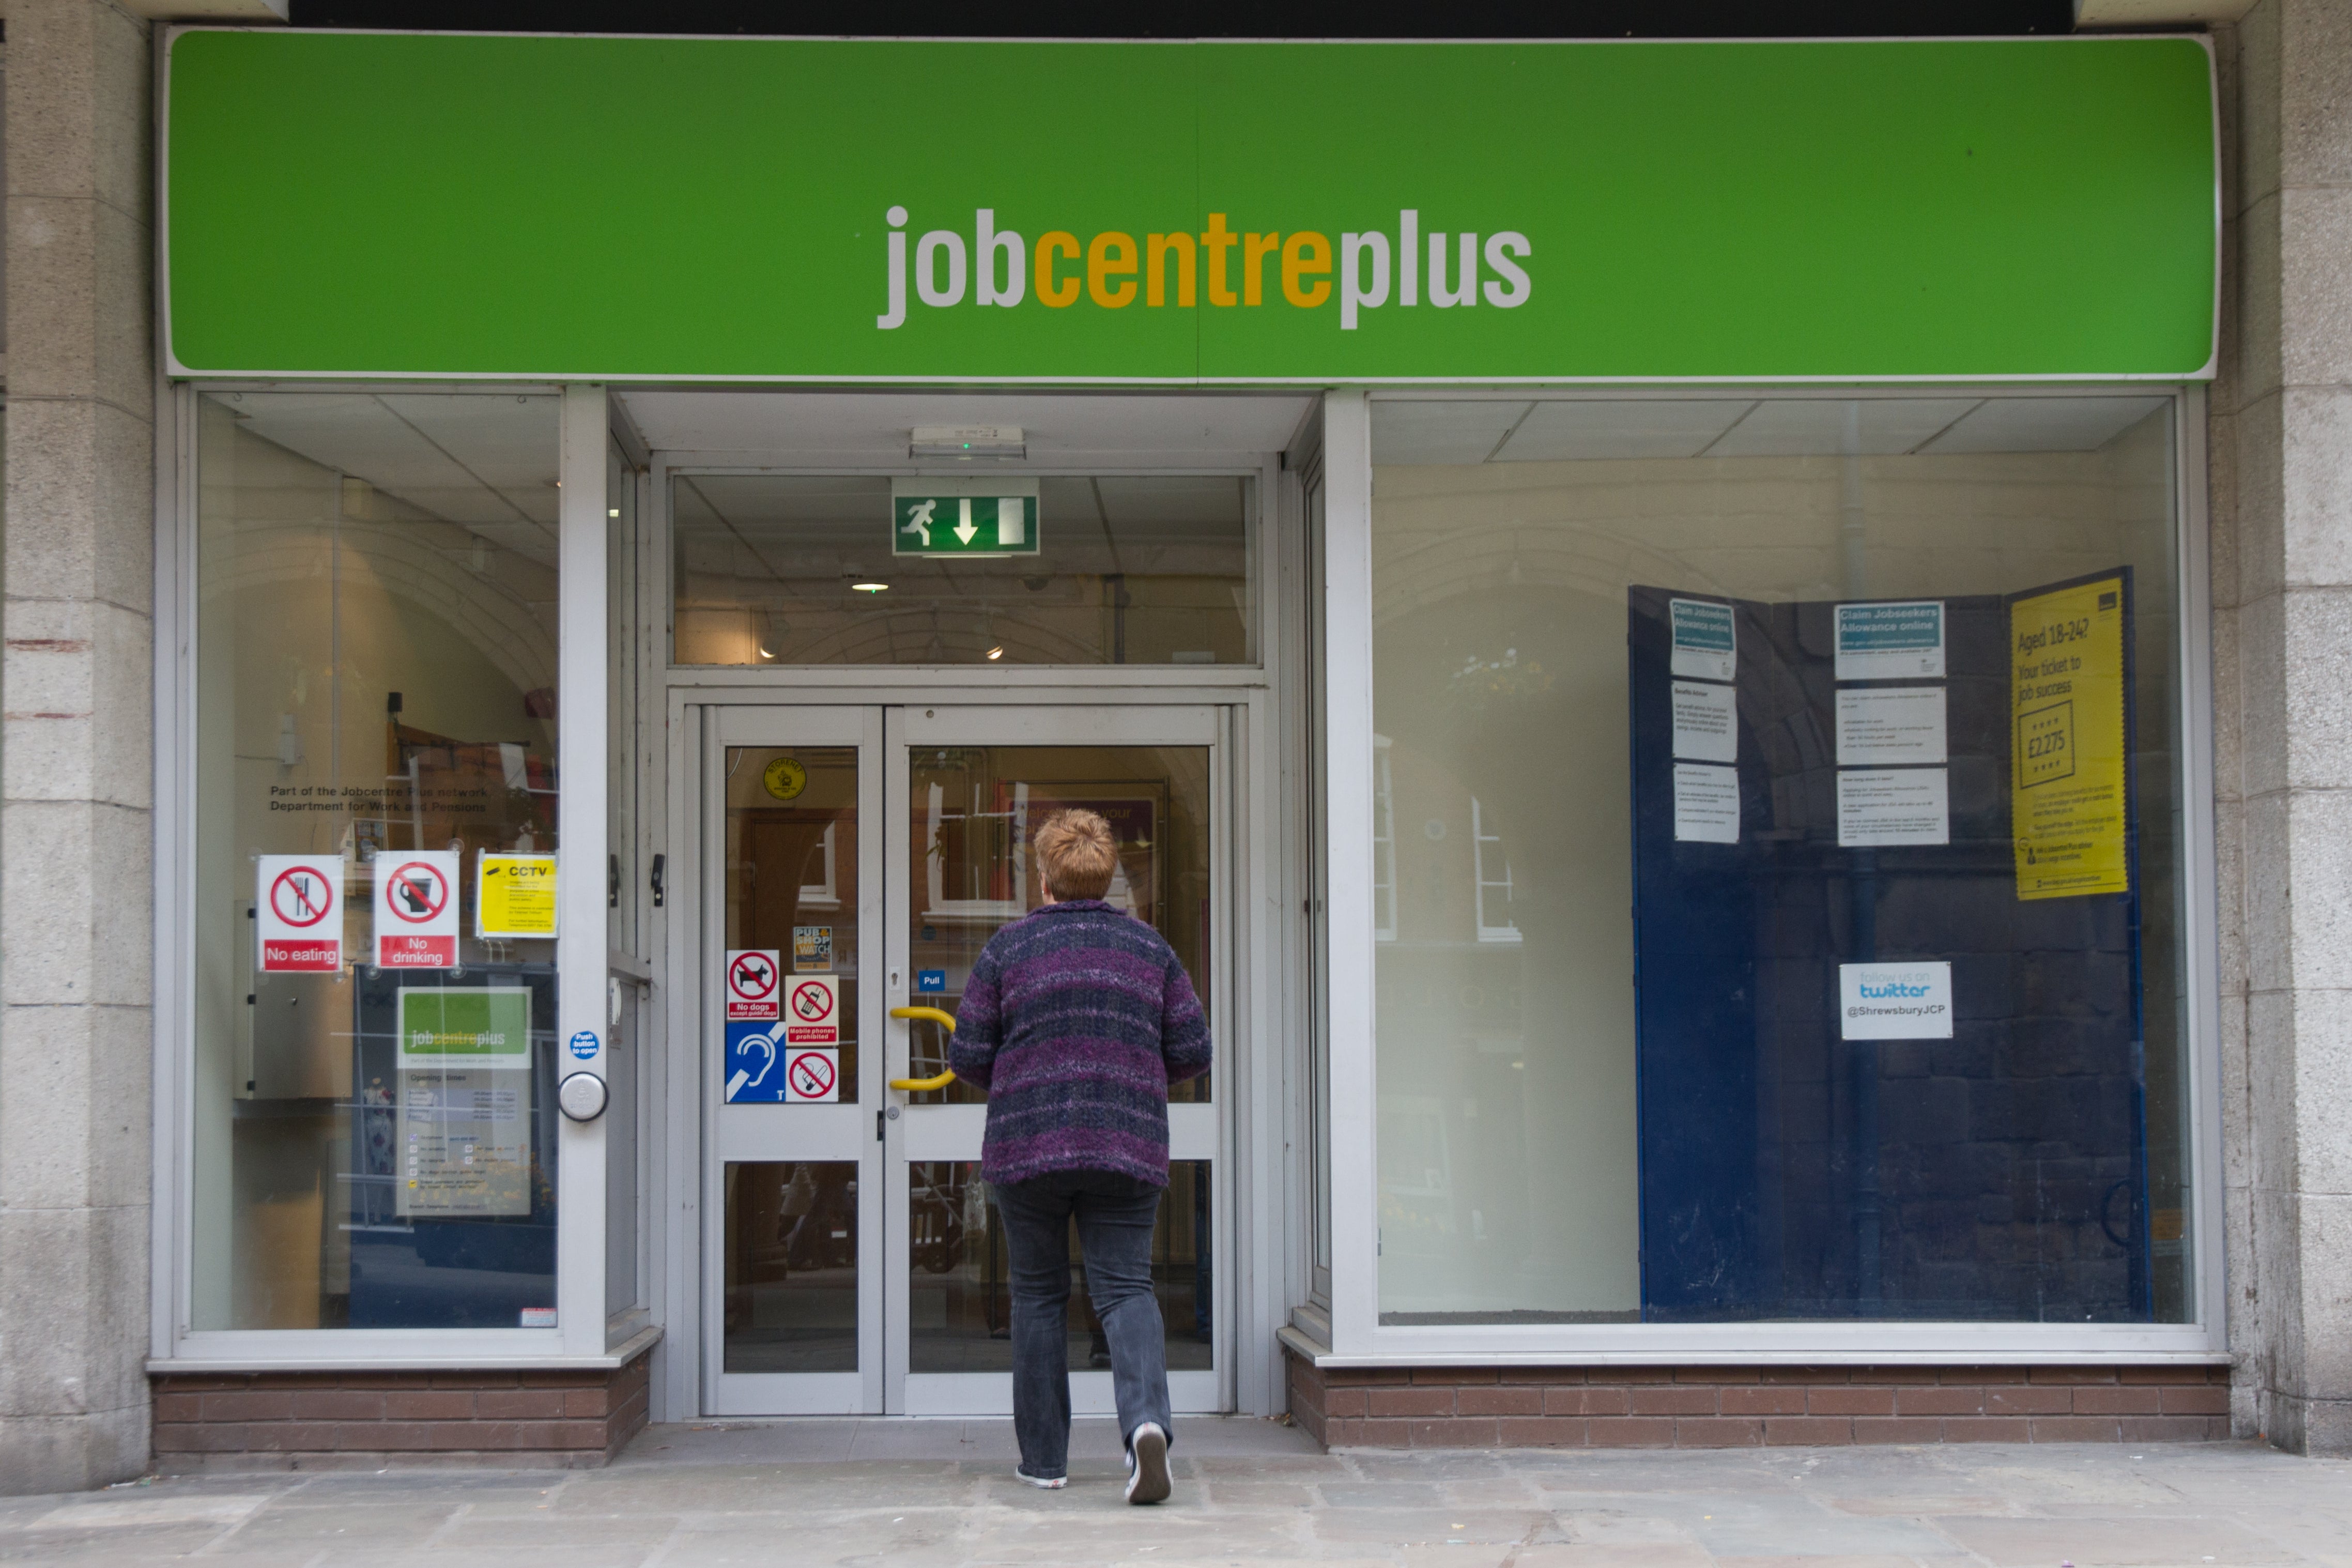 The schemes have kept millions from joining Britain’s rapidly growing number of unemployed people&nbsp;